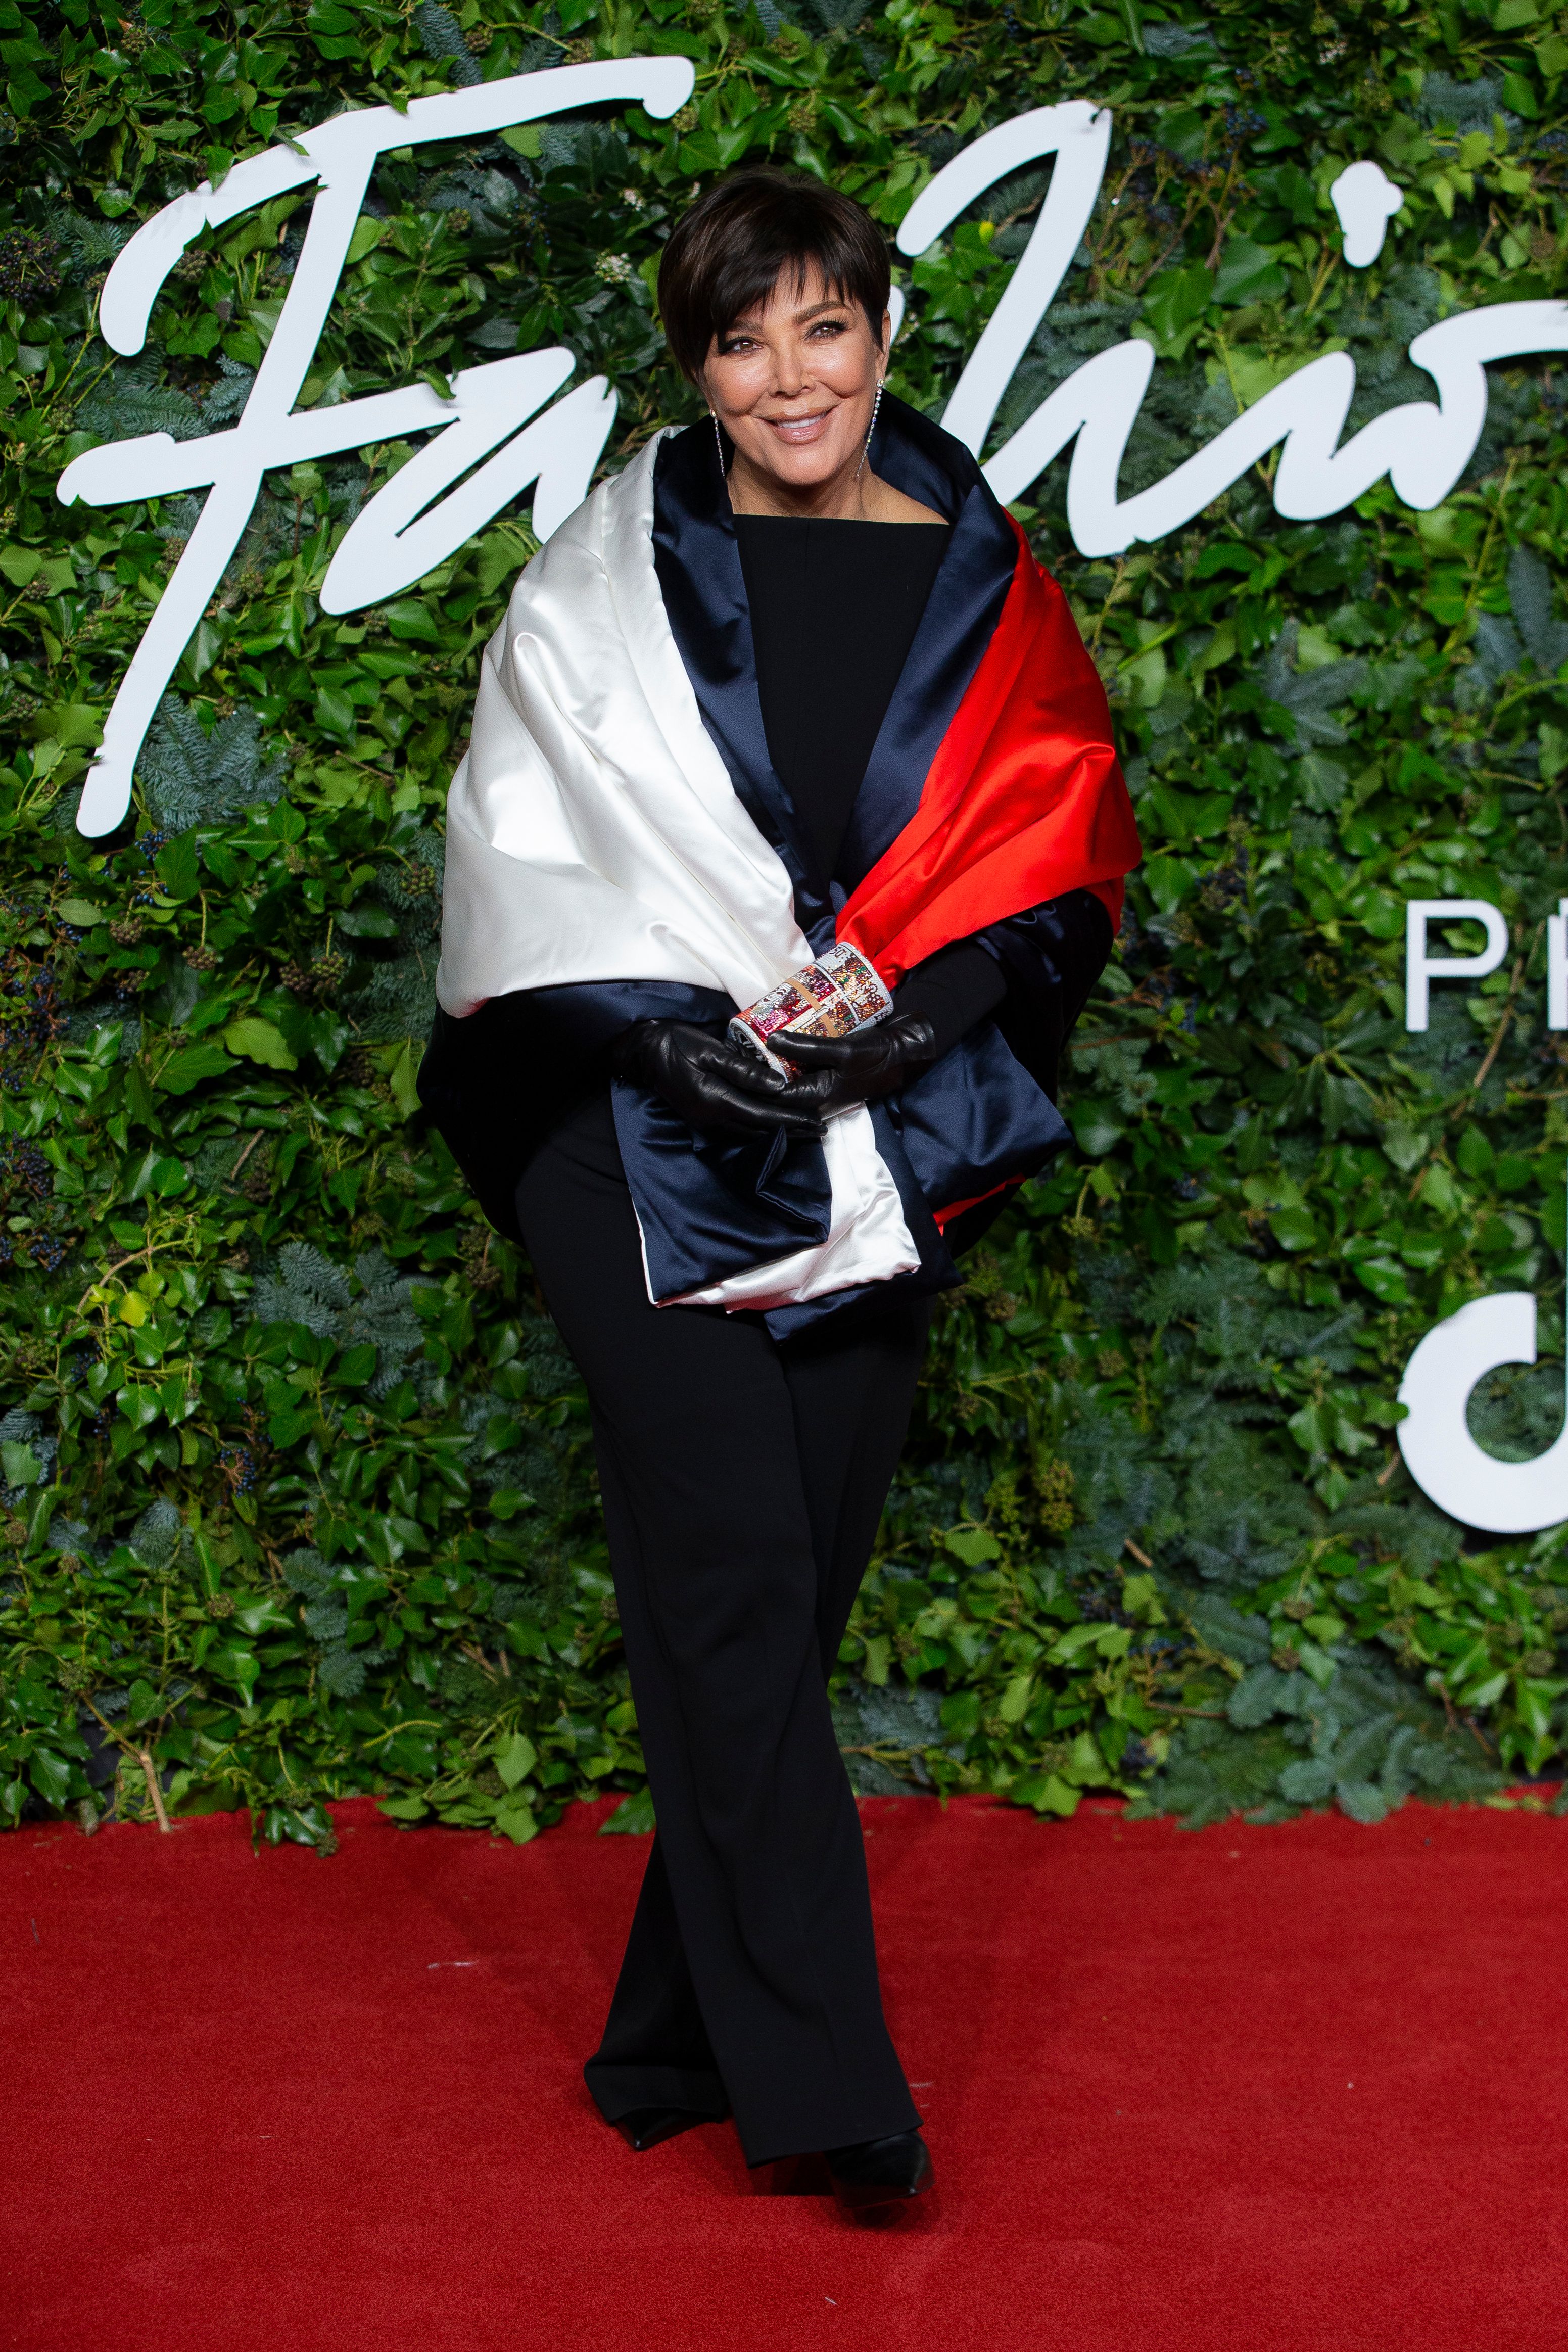 Kris Jenner Best Style Moments: Photos of the 'KUWTK' Star's Top Looks ...